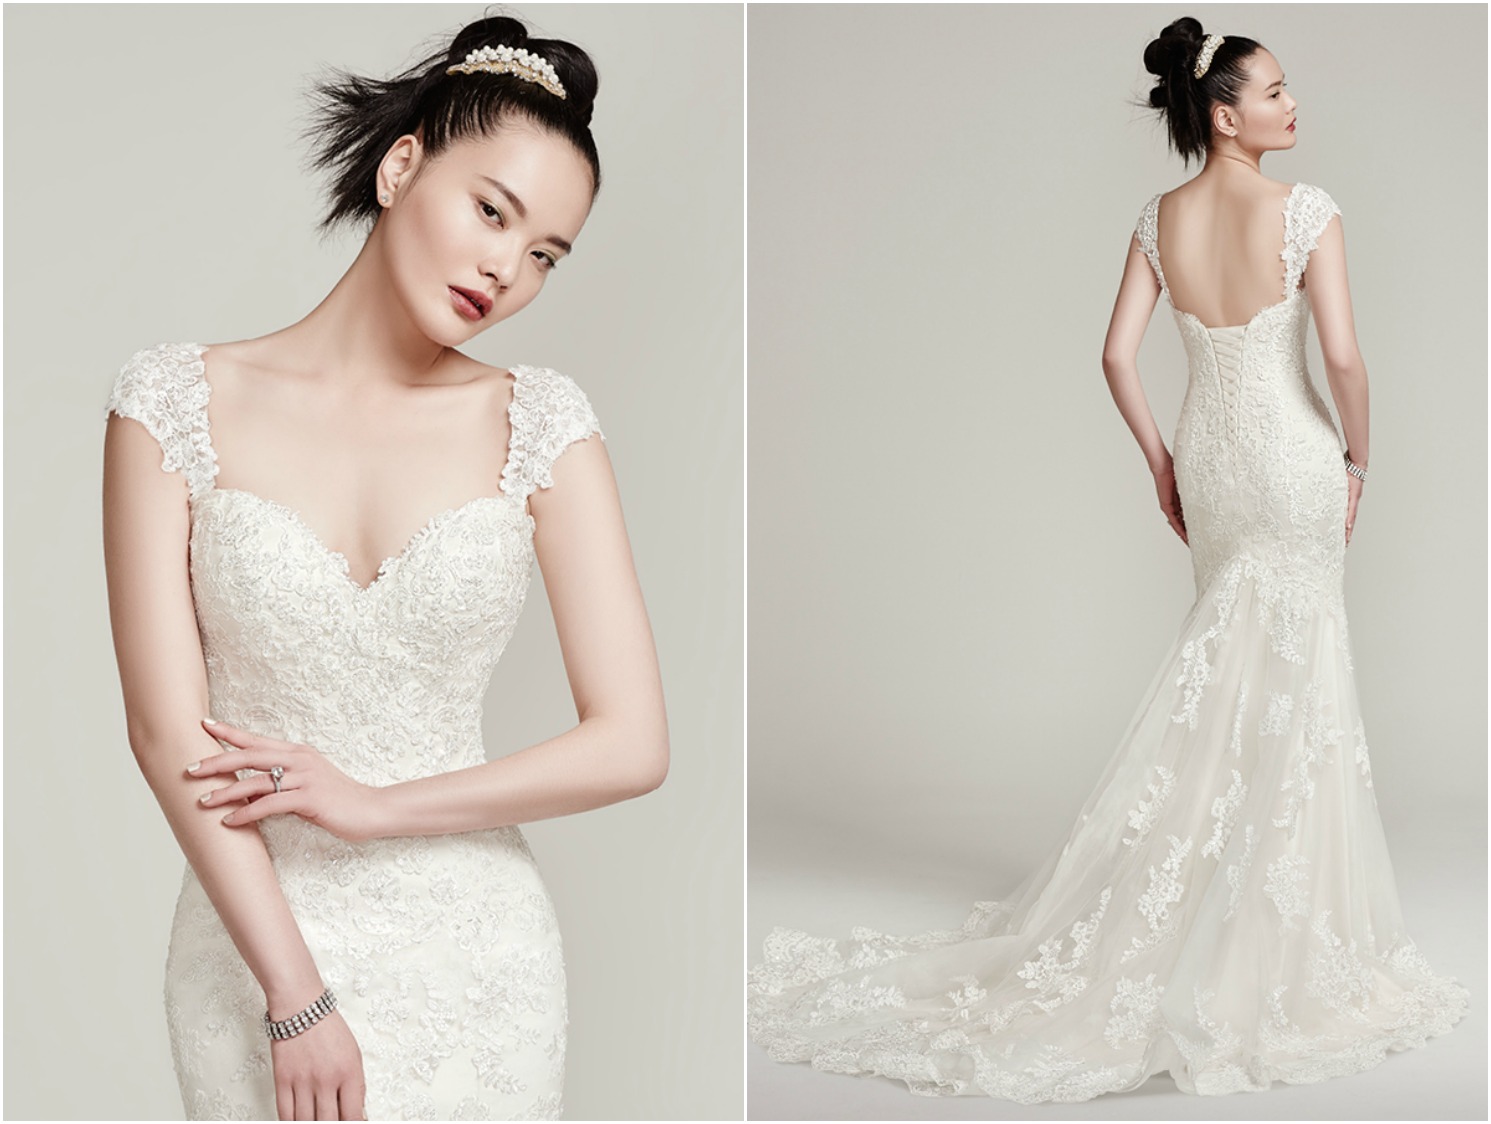 Lightly embellished lace and the dramatic scalloped hemline and train create a simply stunning fit and flare wedding dress. Finished with sweetheart neckline and corset closure or covered buttons over zipper closure. Detachable lace cap-sleeves and veil sold separately. 

<a href="https://www.maggiesottero.com/sottero-and-midgley/ireland/9856" target="_blank">Sottero &amp; Midgley</a>